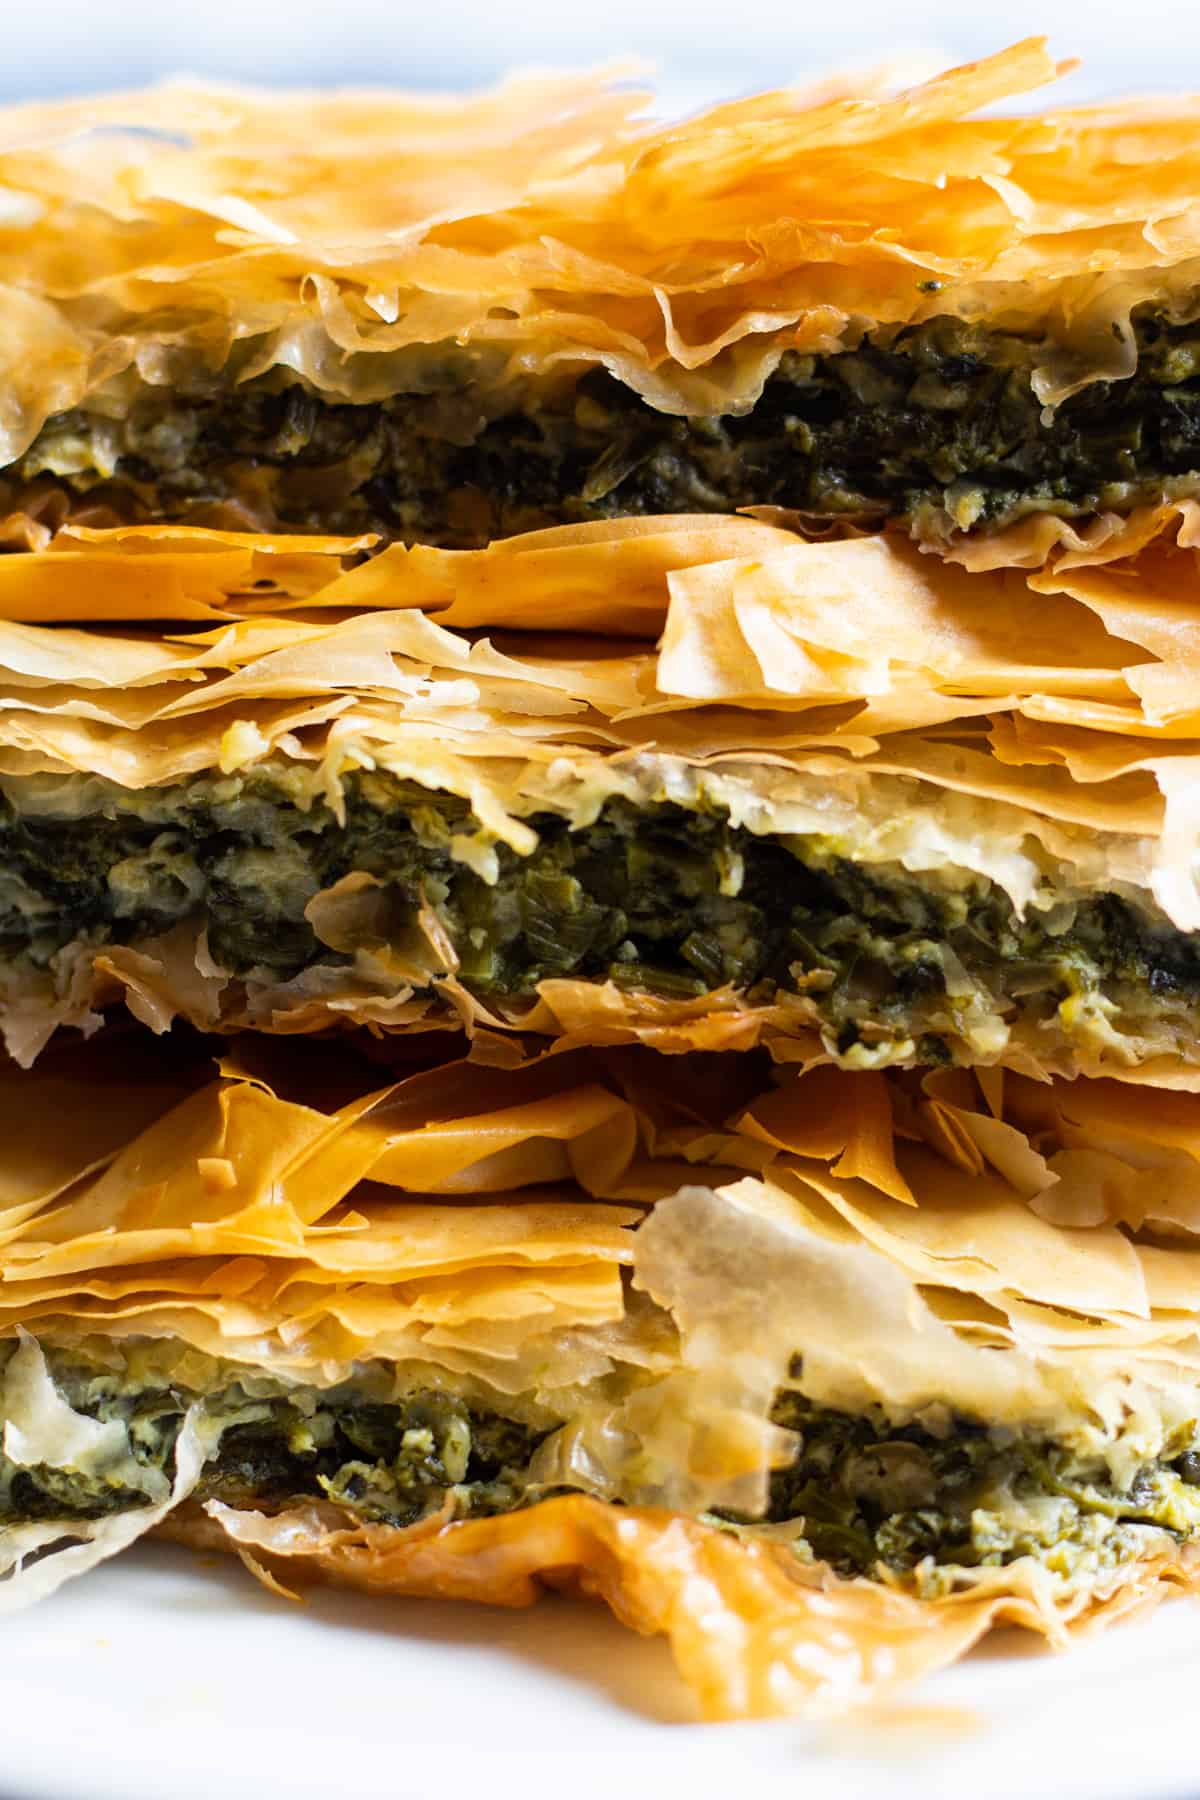 Spanakopita is a classic Greek pie made with phyllo dough, spinach and feta. It's packed with so much flavor and one slice is never enough! Learn how to make spanakopita recipe with a video tutorial. 